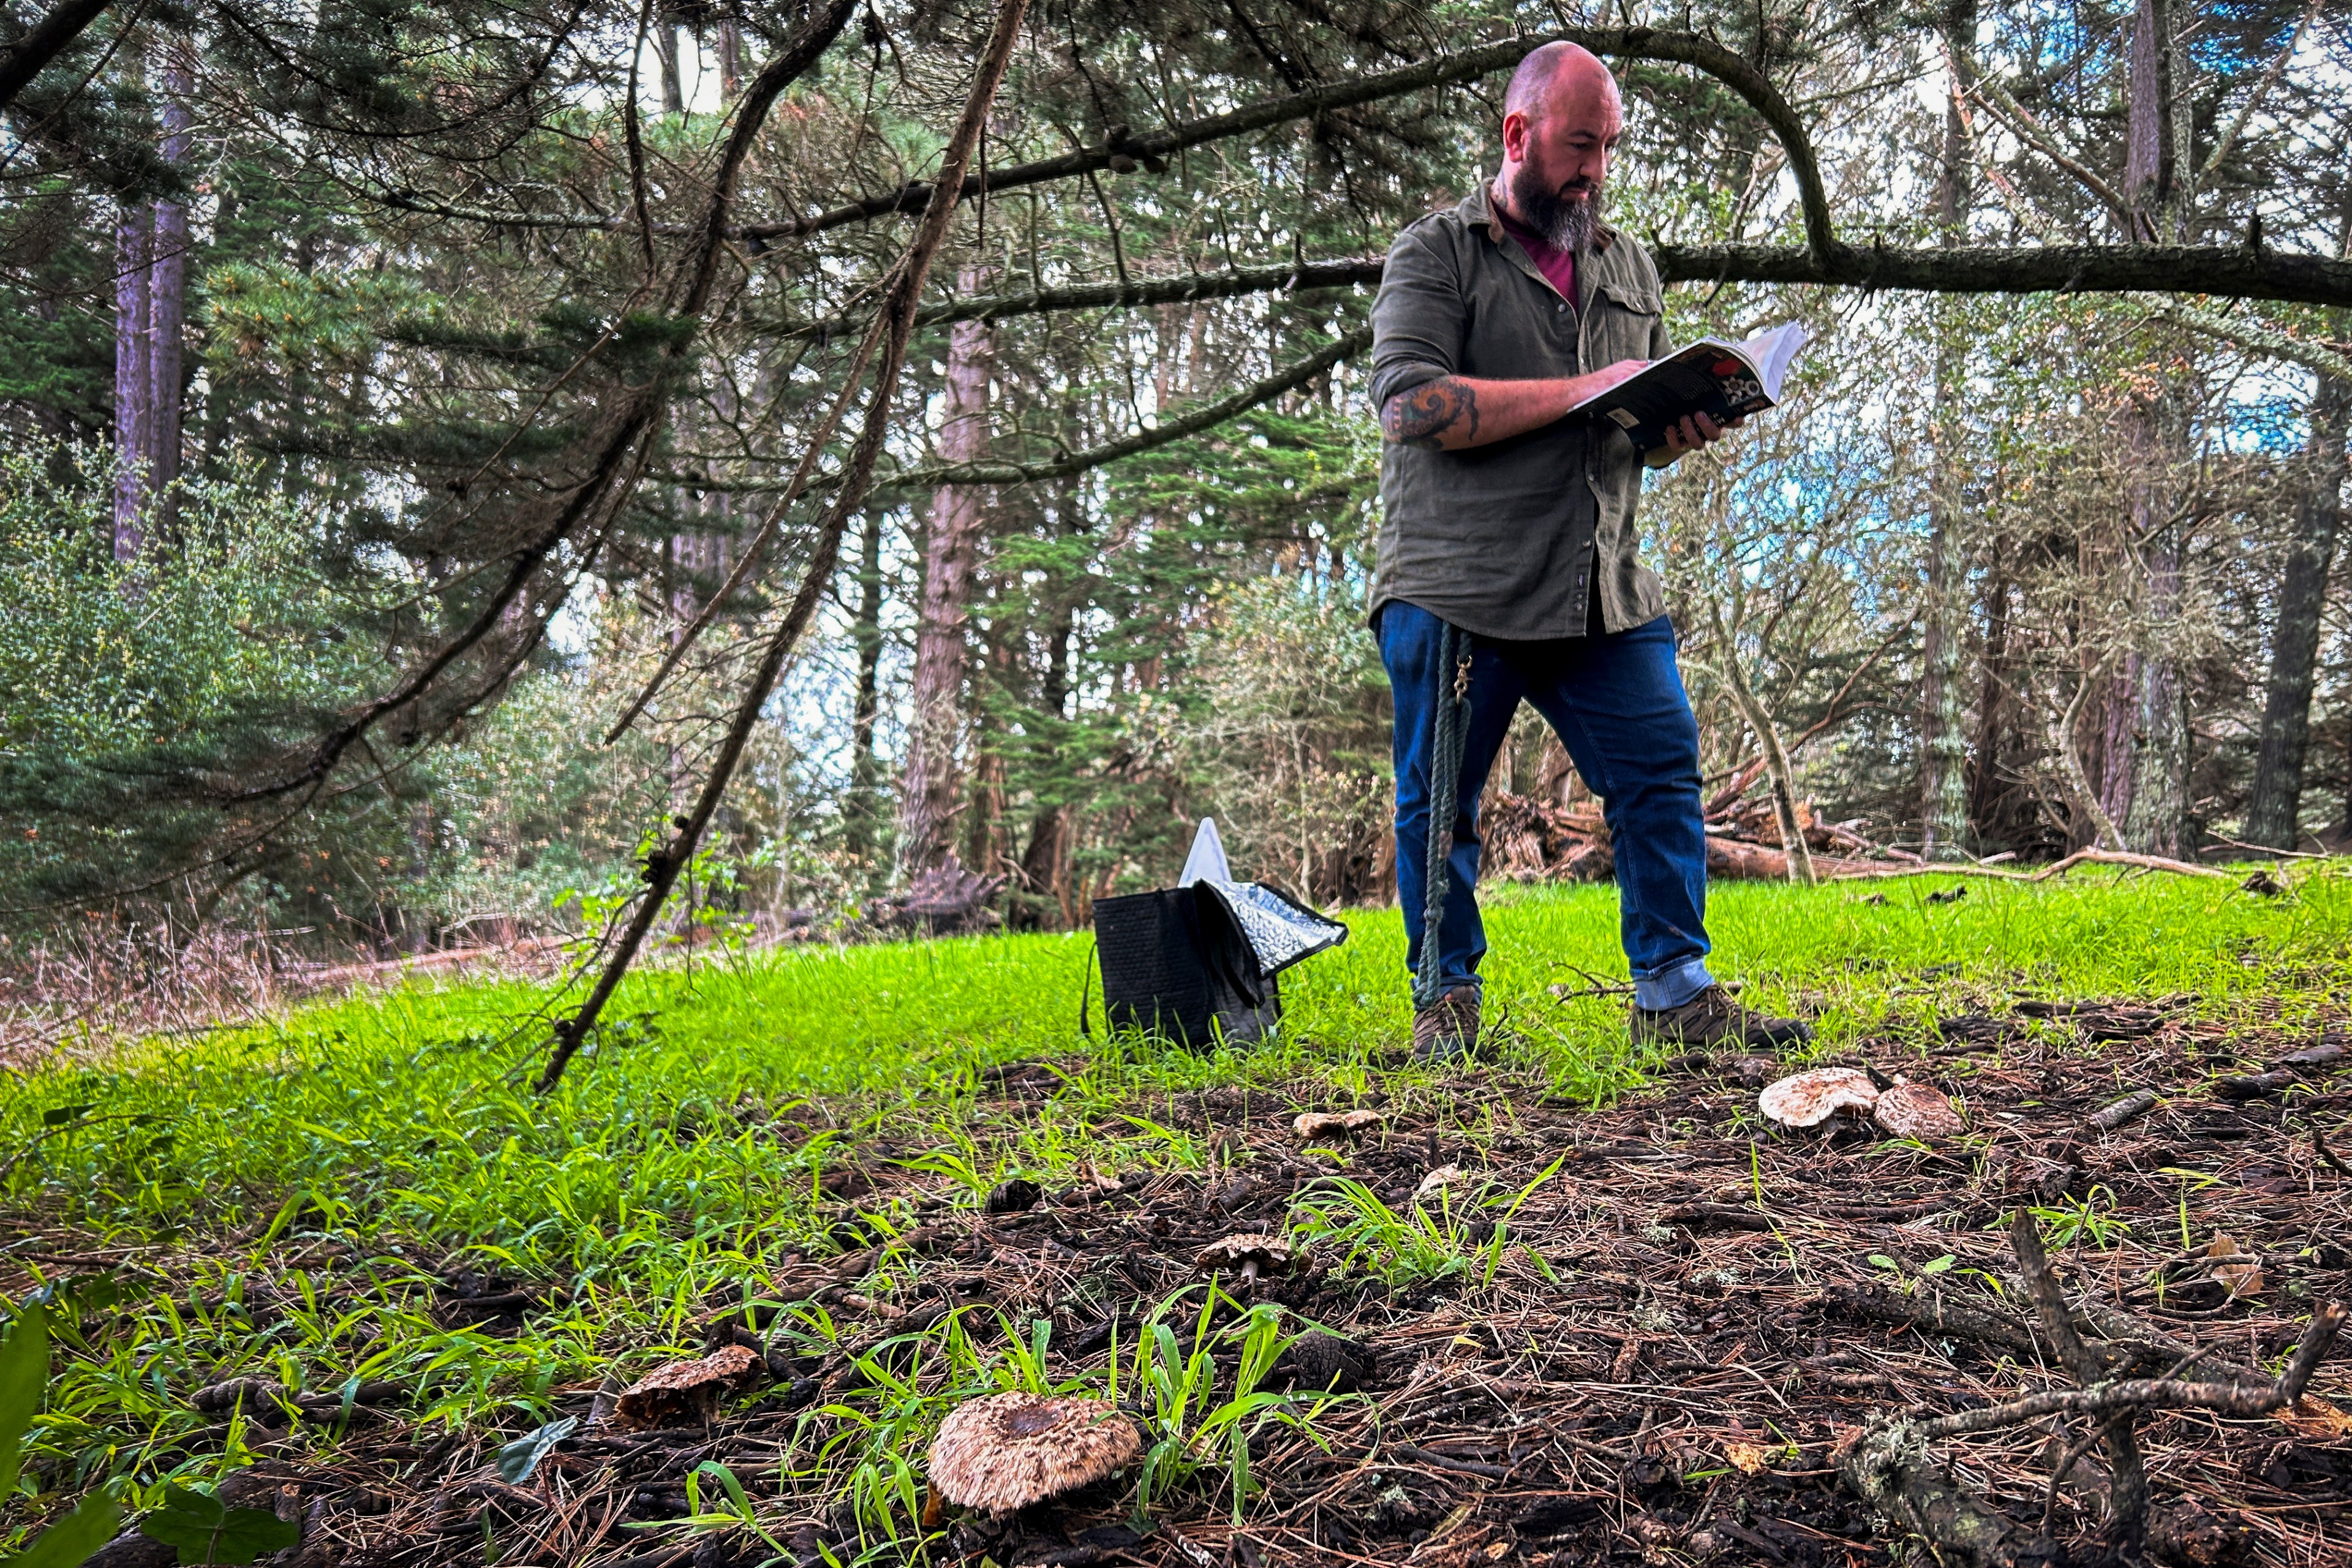 a bearded white middle-aged man in jeans and a red cap leafs through a book in the woods, with a bag to his left and mushrooms growing in the foreground